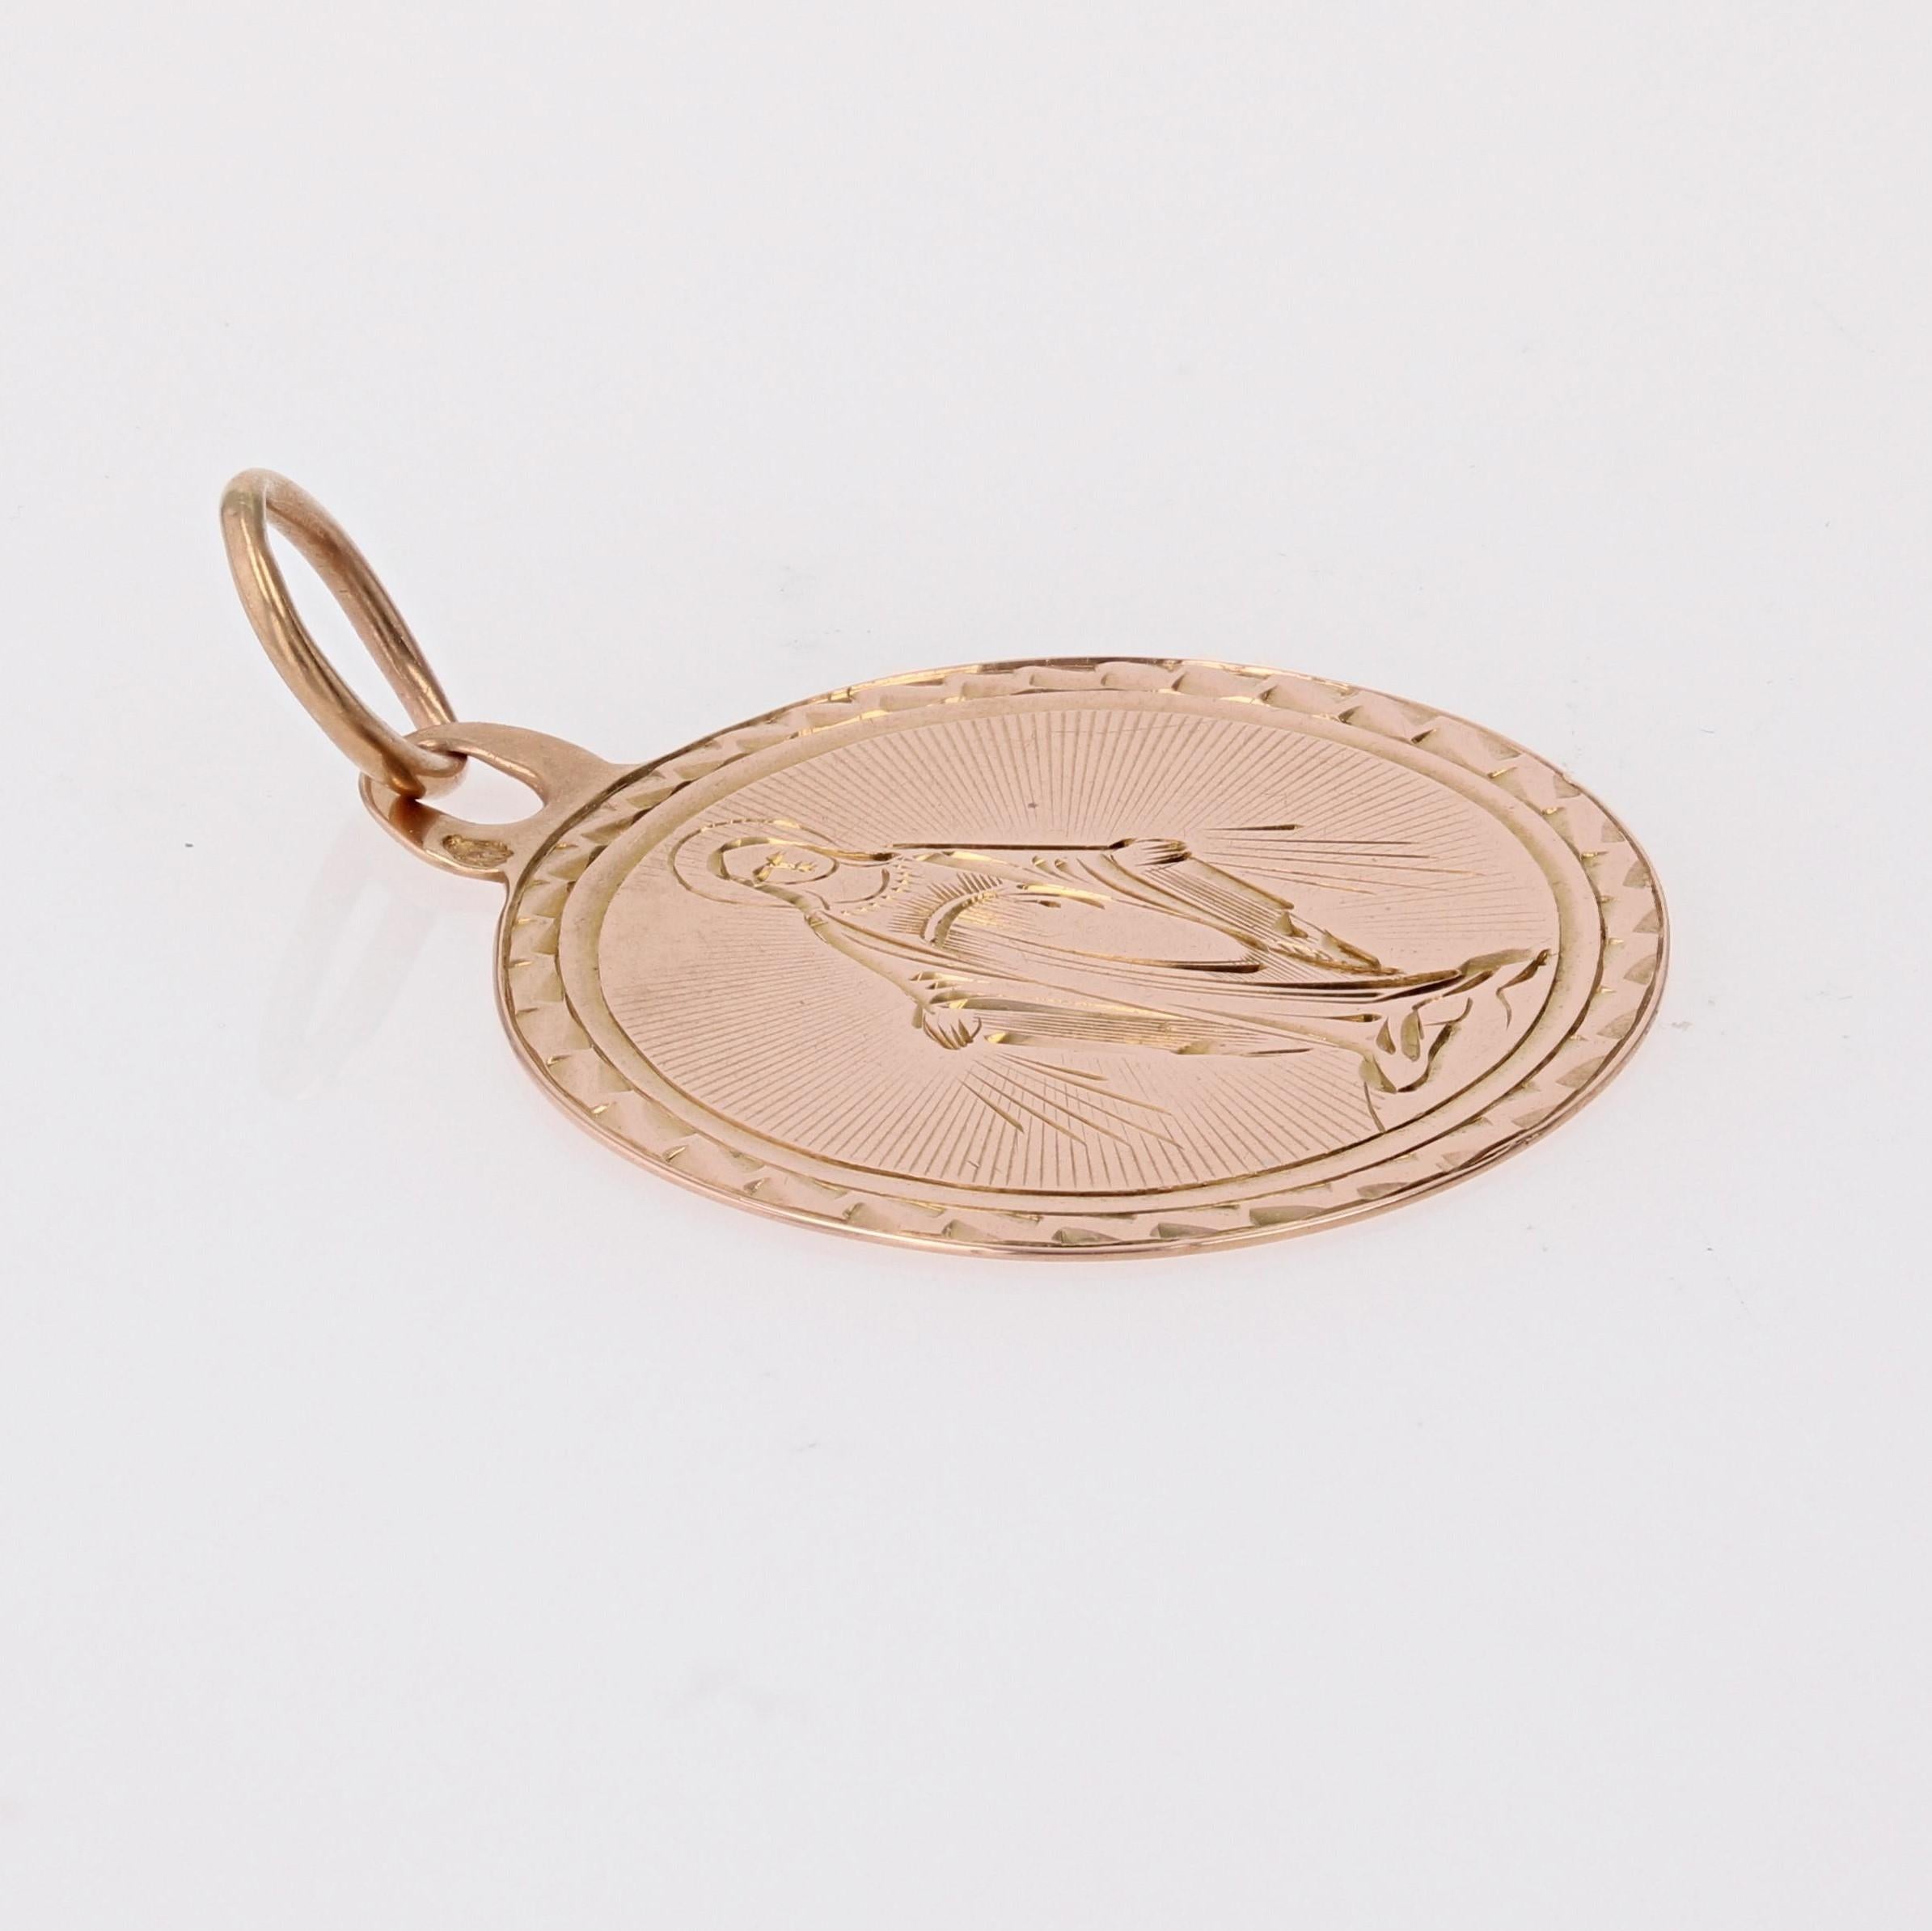 Medal in 18 karat rose gold, eagle head hallmark.
Antique round shape medal, it is engraved with the Virgin Mary holding her arms open and encircled by a chased decoration. The back of this religious pendant is engraved: 